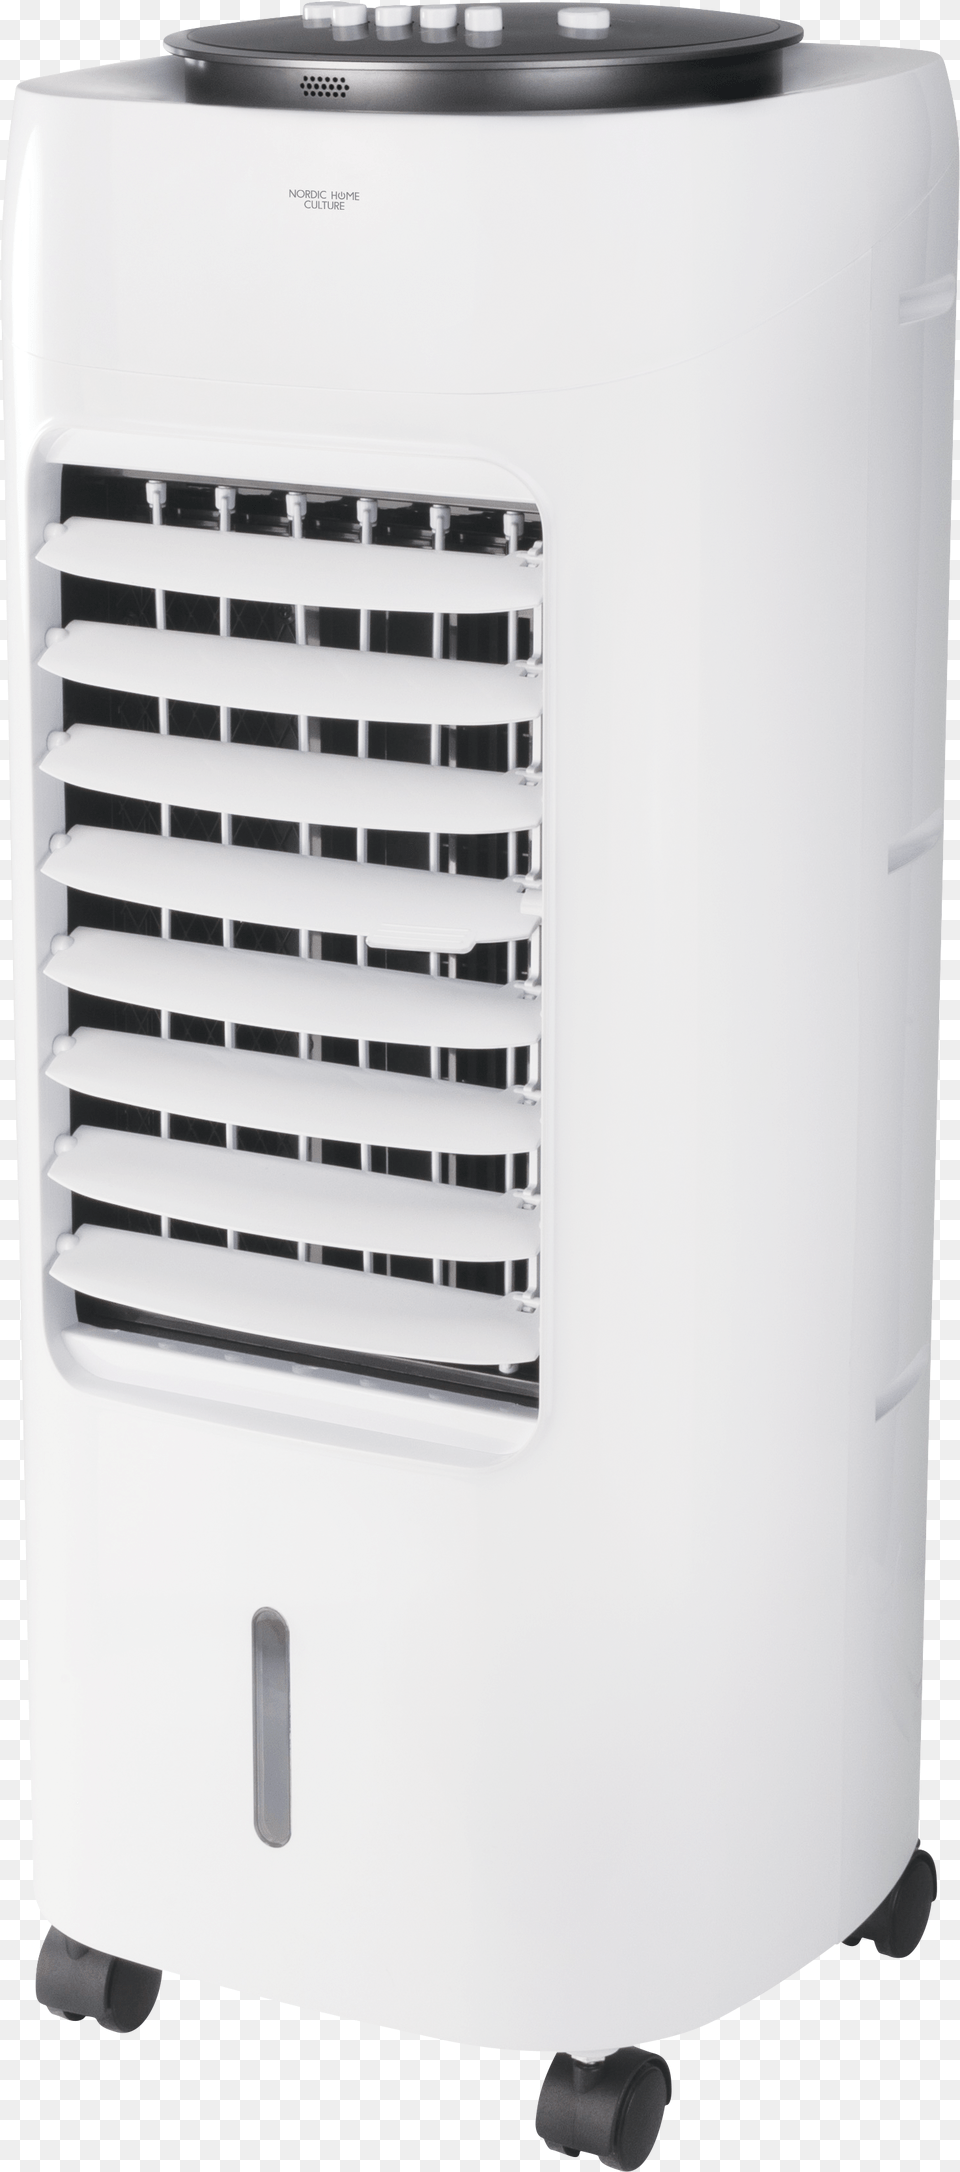 Dehumidifier, Appliance, Device, Electrical Device, Refrigerator Png